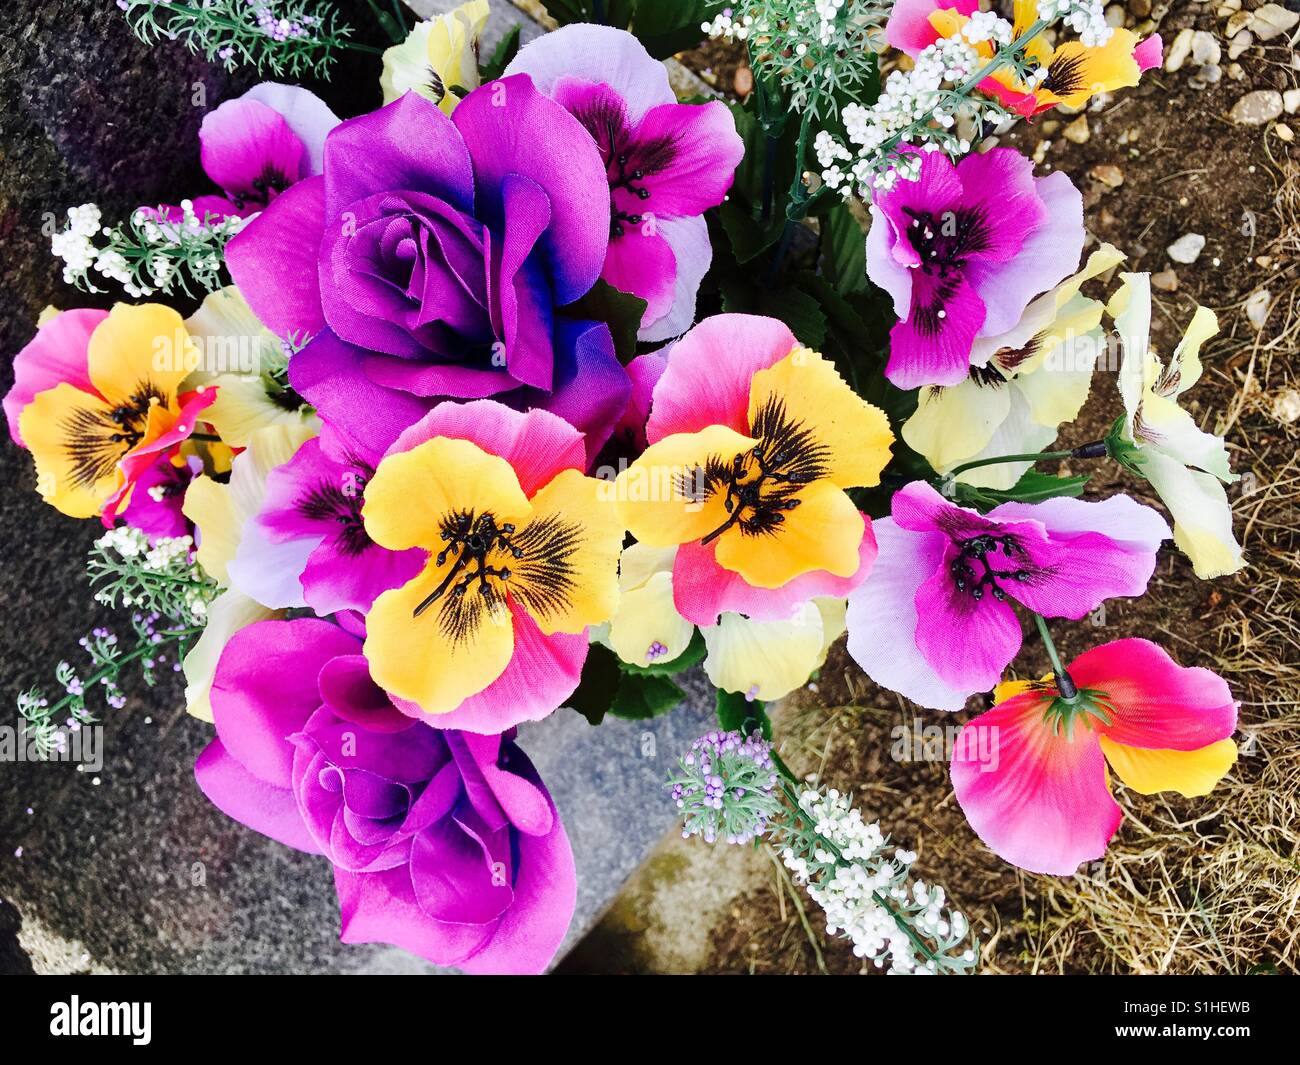 Purple roses and yellow pansies Stock Photo